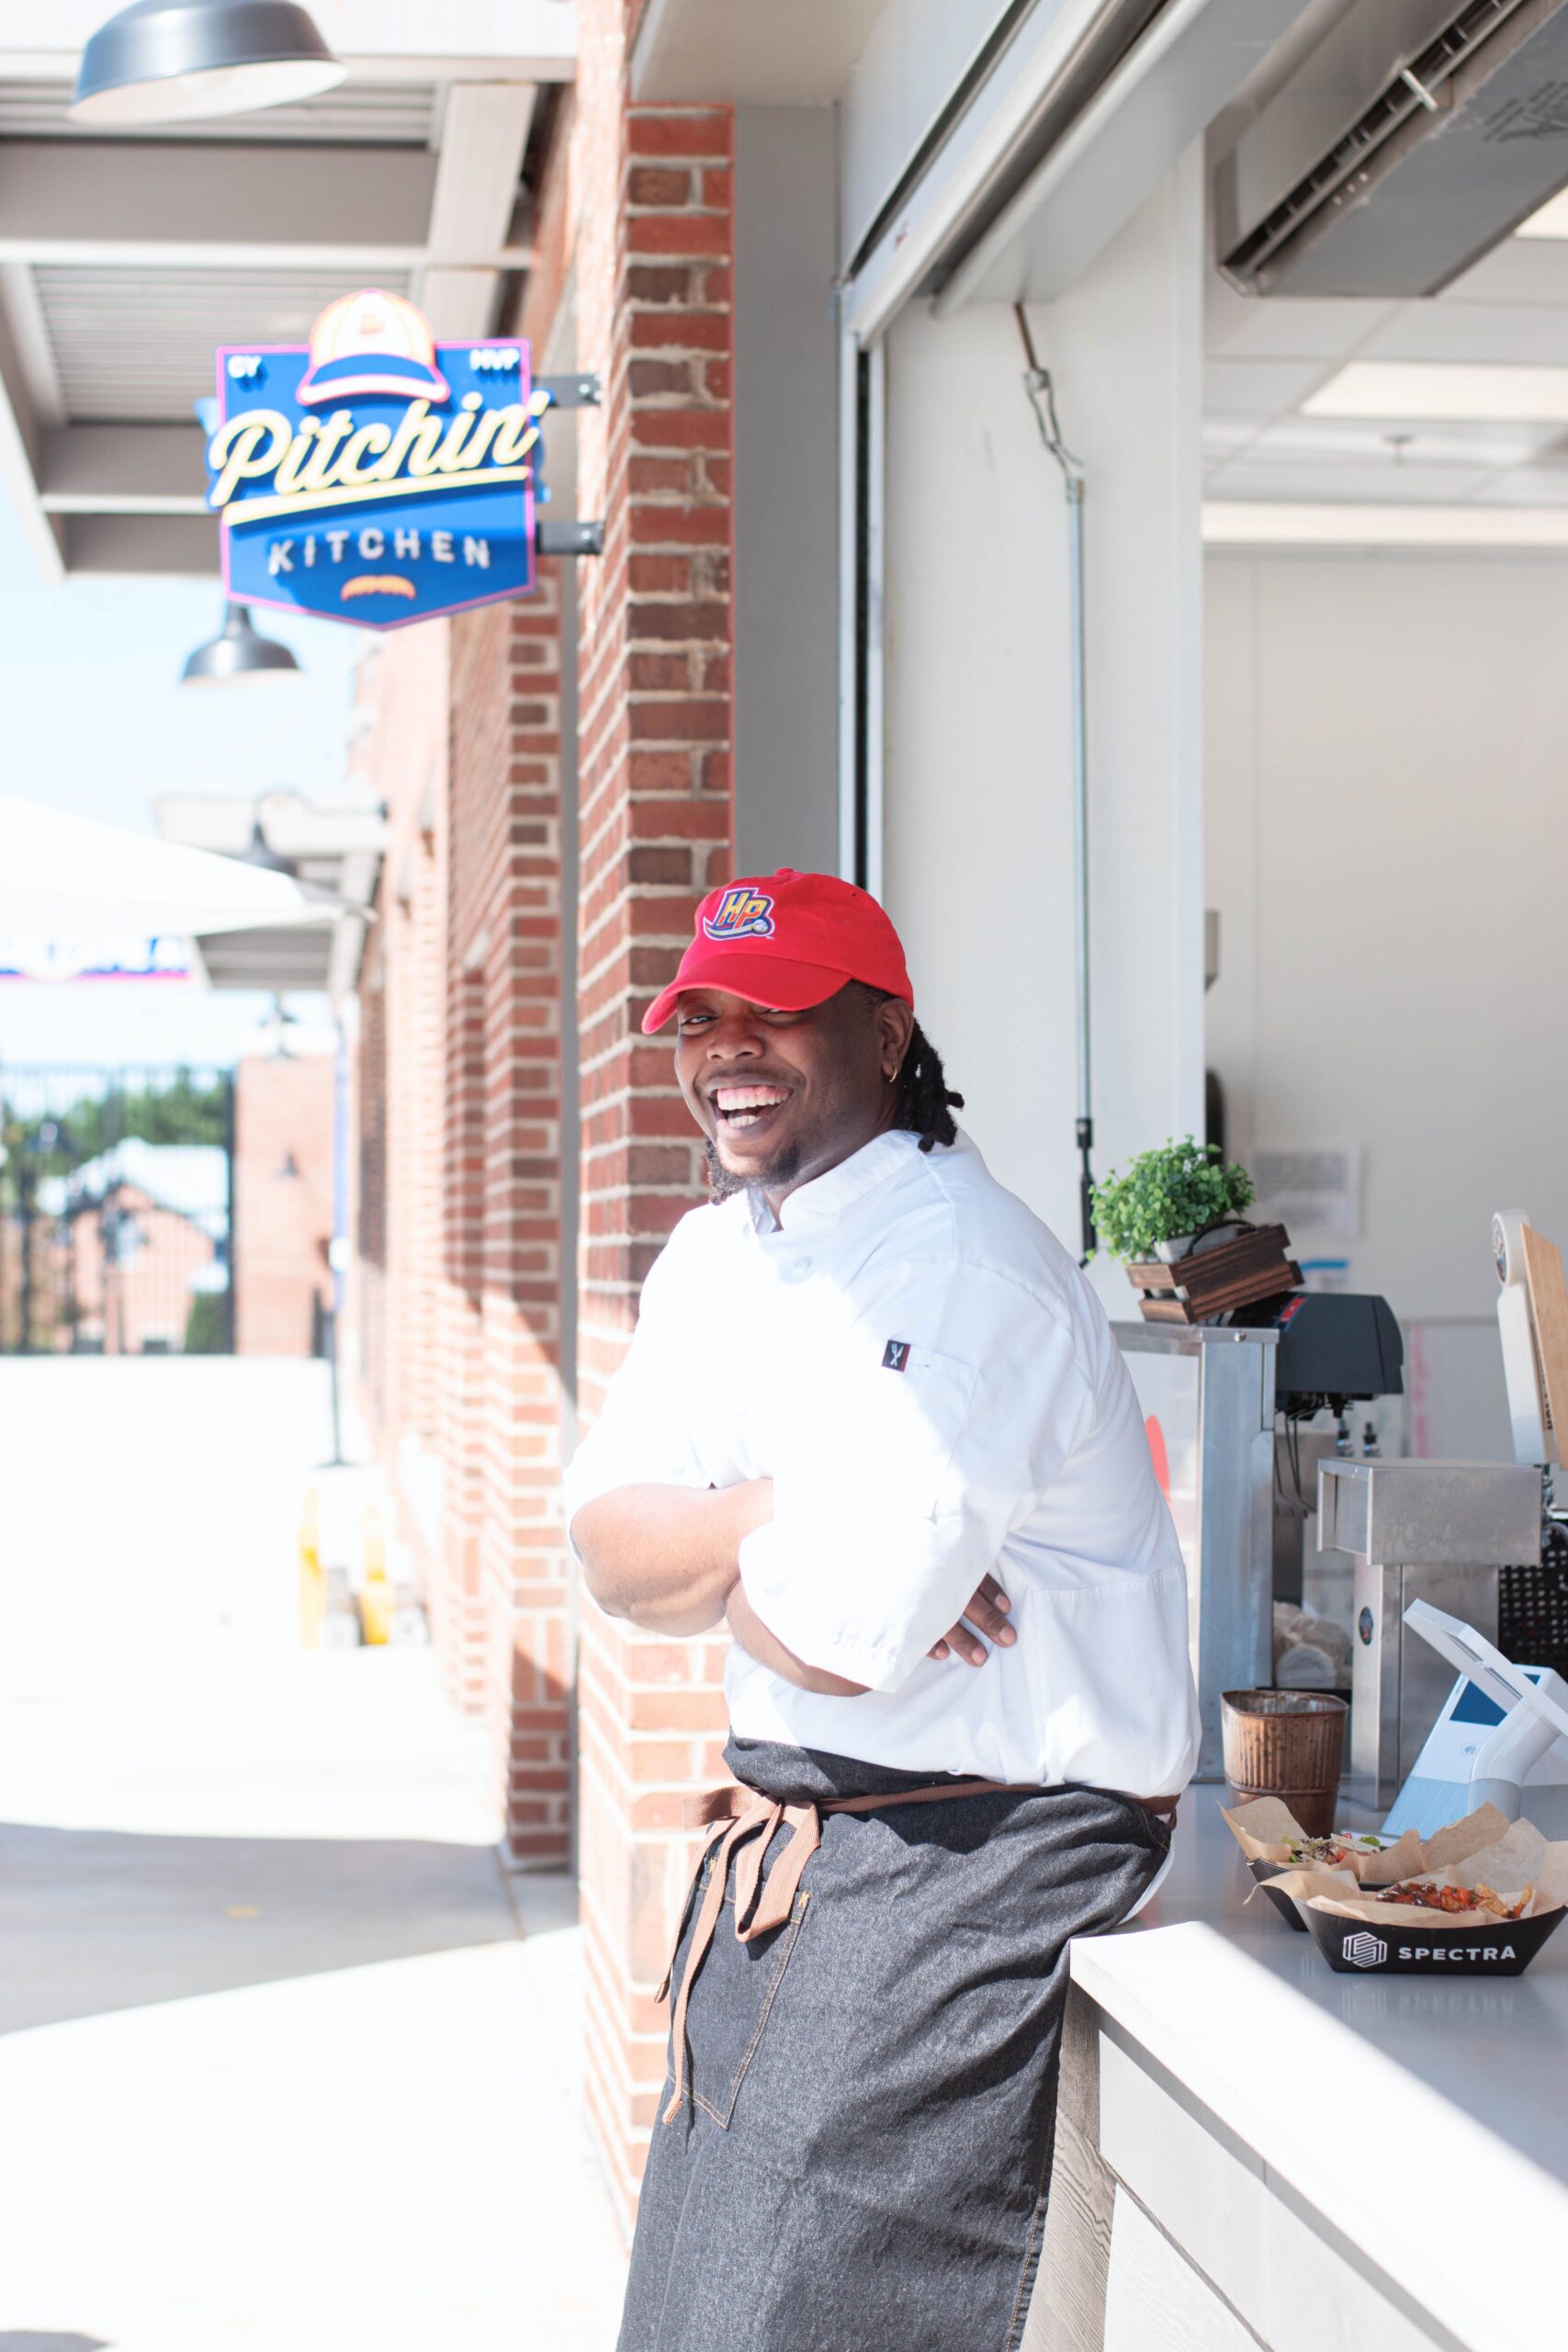 Miquel Phillips laughs leaning against the counter at the Pitchin' Kitchen at the High Point Rocker's stadium in High Point, NC.